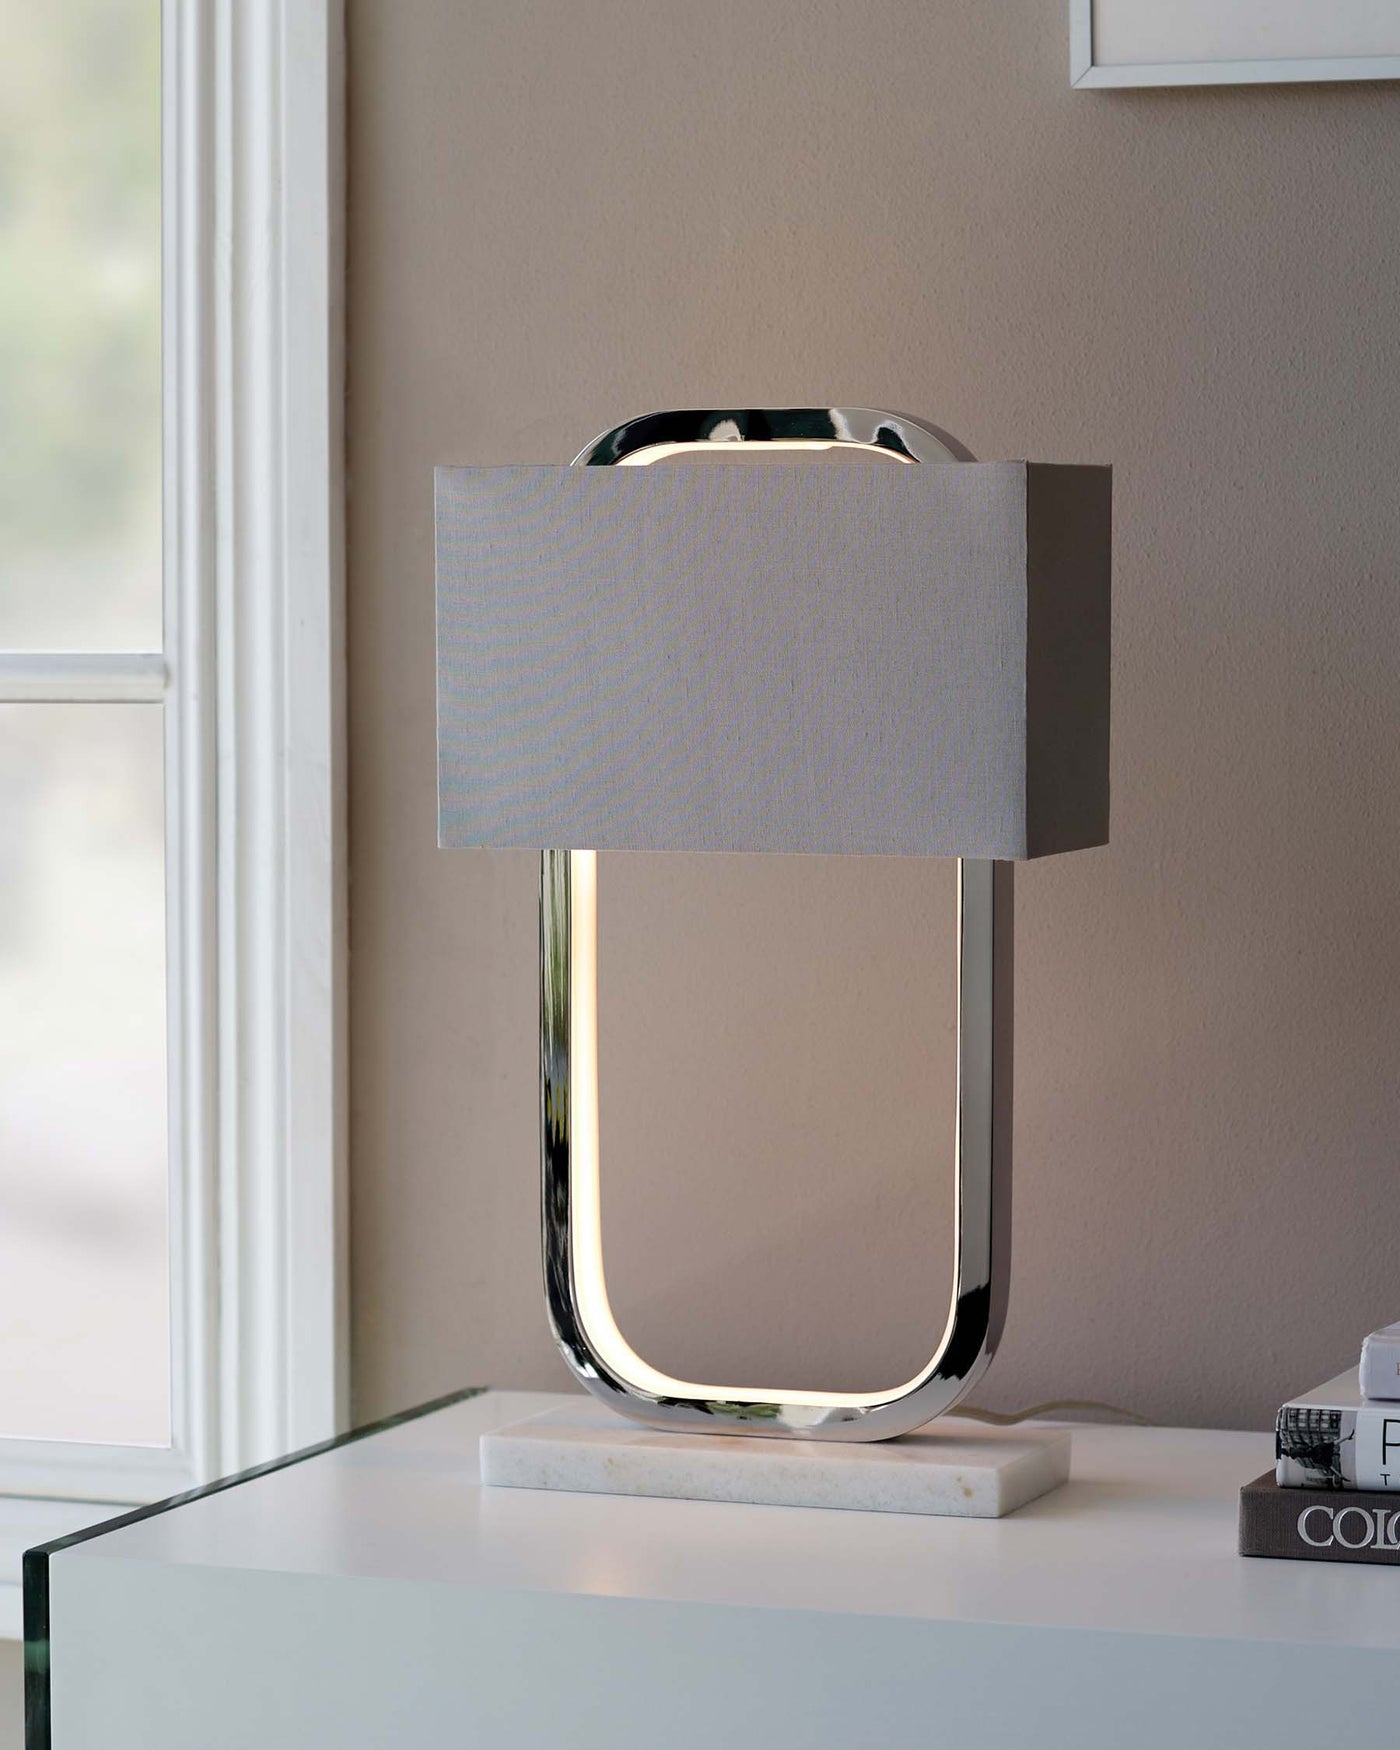 Contemporary table lamp with a polished chrome finish and an elegant fabric shade, placed on a glossy white surface near a window.